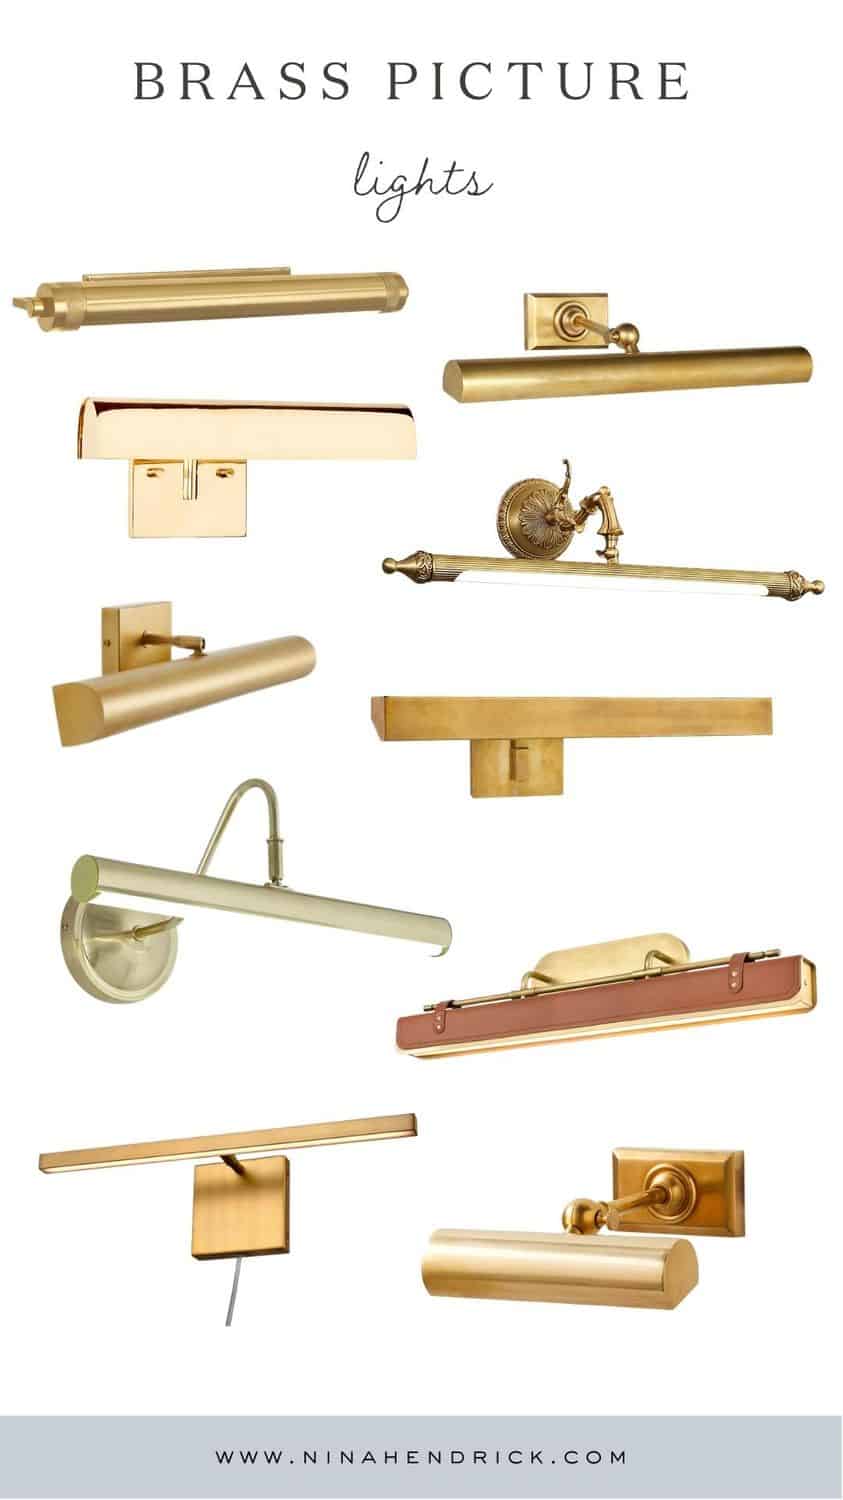 Brass picture lights shopping guide